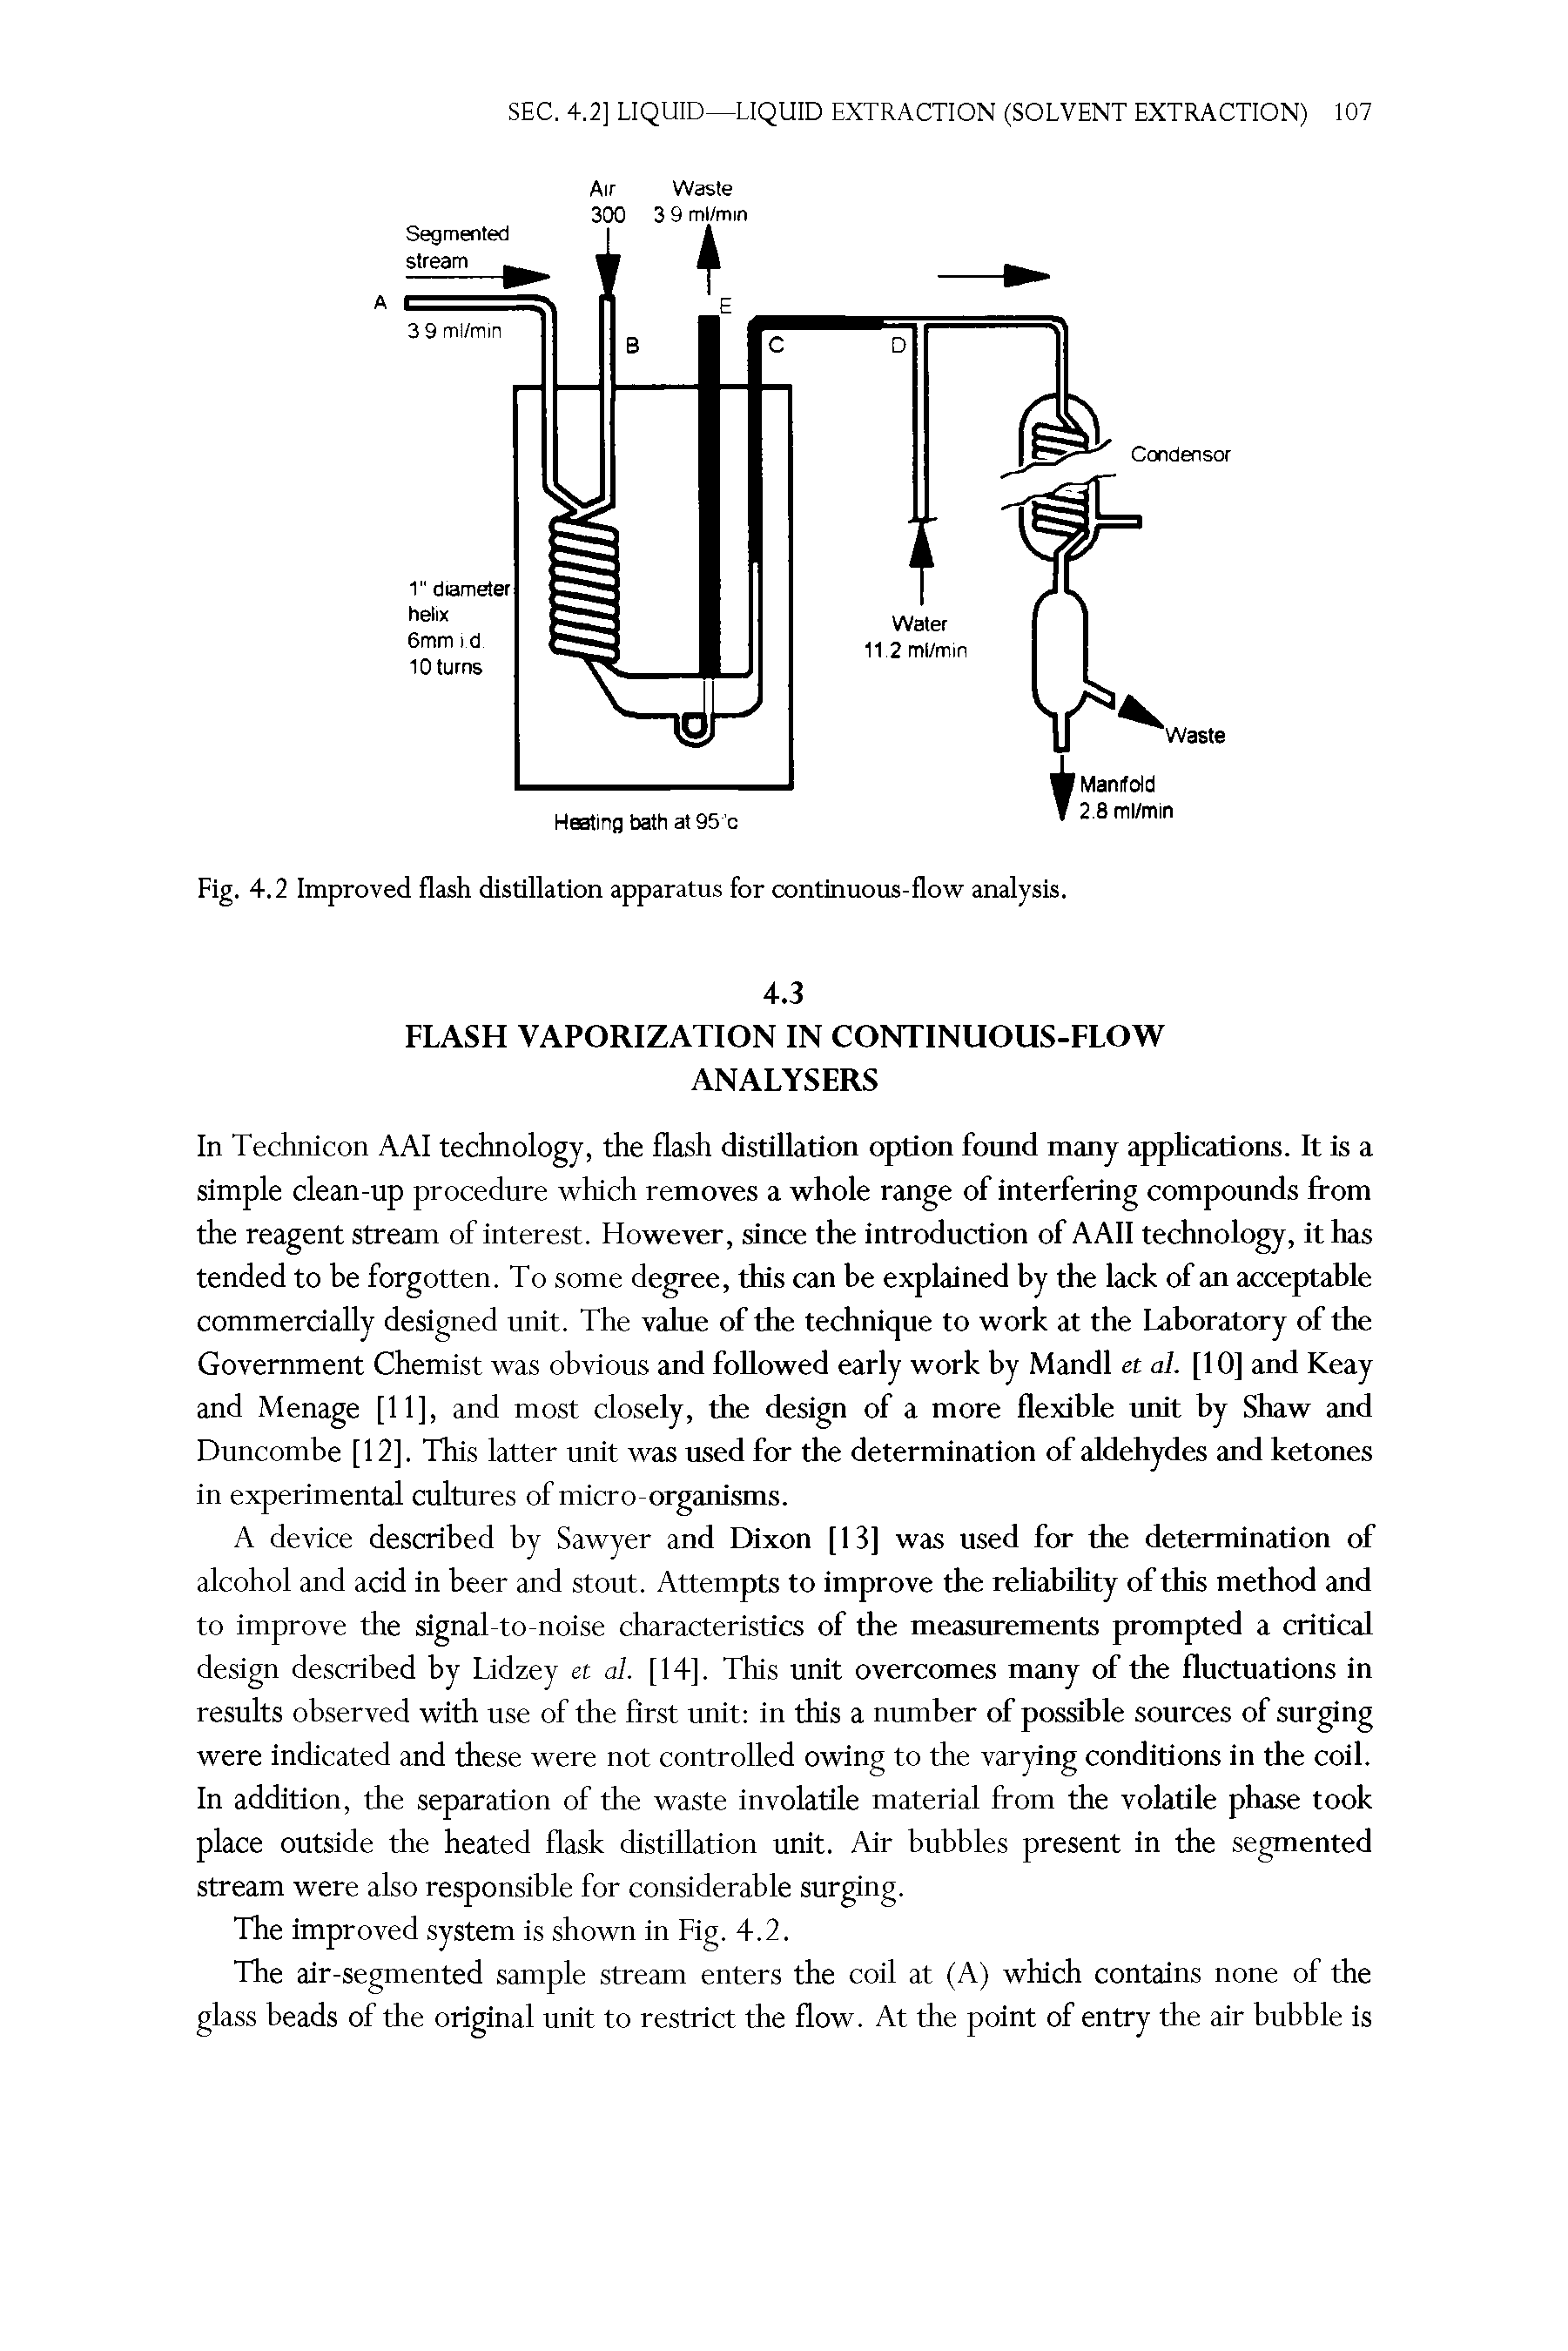 Fig. 4.2 Improved flash distillation apparatus for continuous-flow analysis.